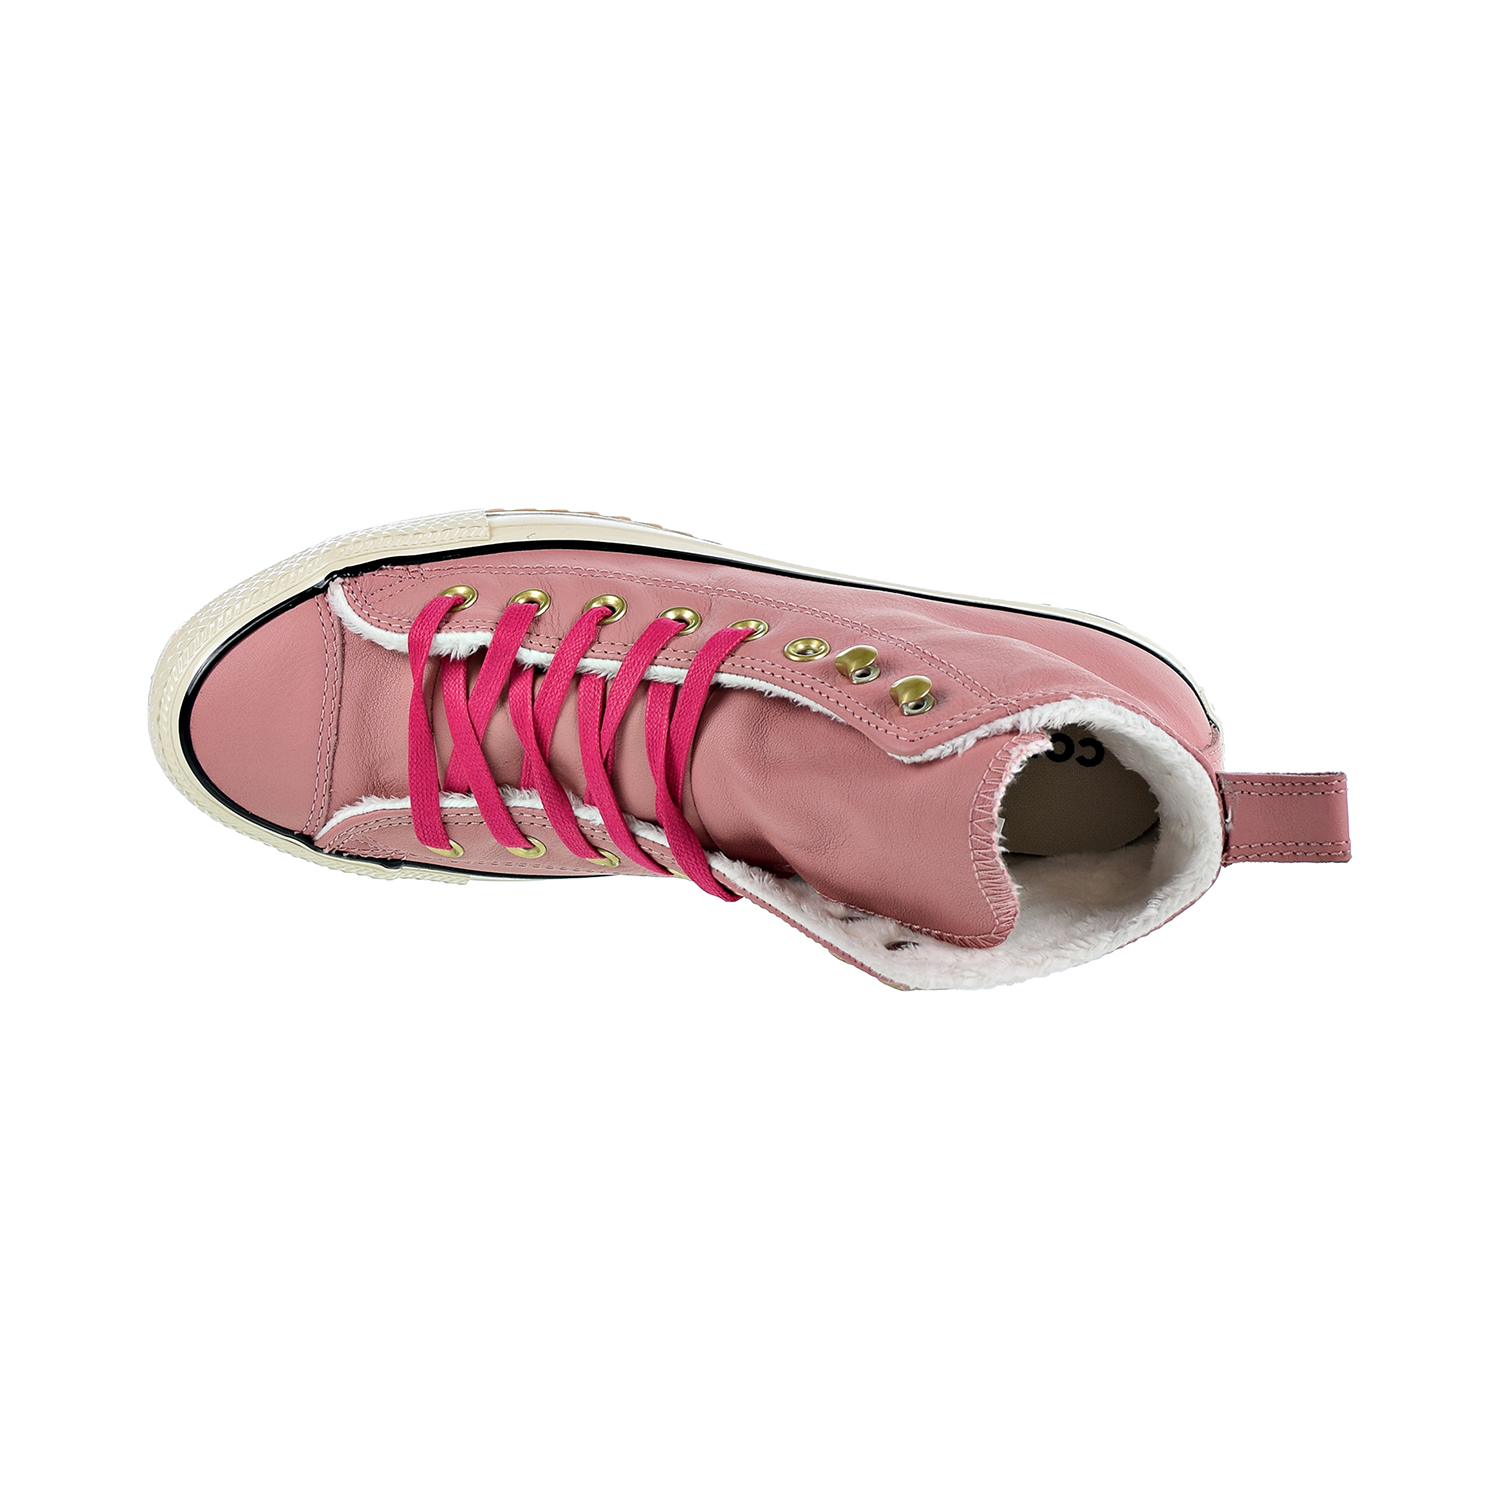 Converse Chuck Taylor All Star Hiker Boot Hi Unisex Sneakers Rust Pink-Pink Pop 162477c - image 5 of 6